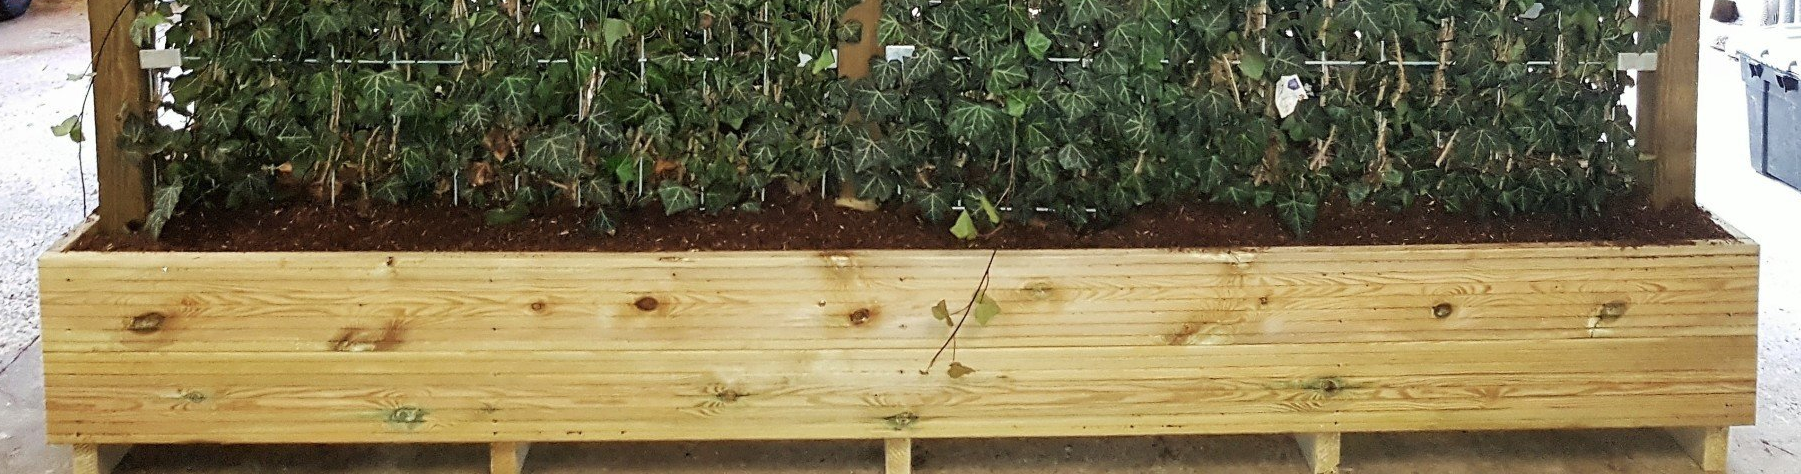 A bespoke timber planter box made on our premises, installed with or without a mobilane green screen